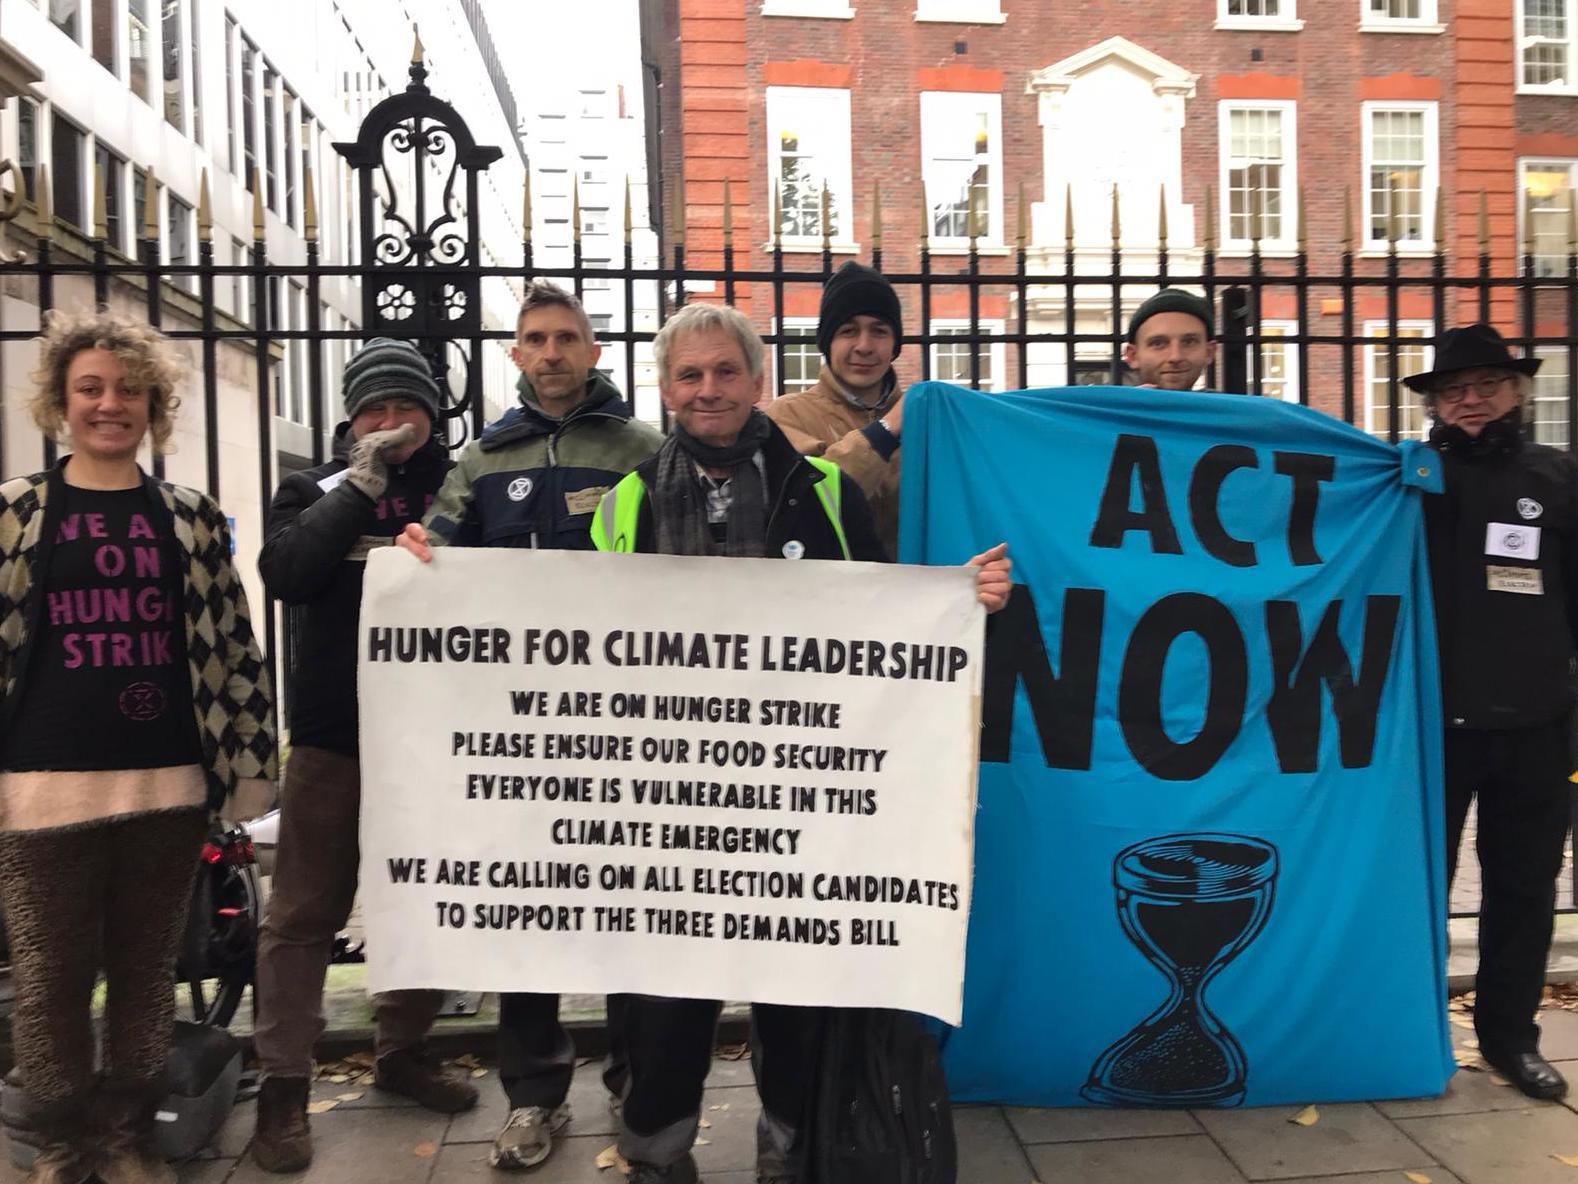 Extinction Rebellion says over 200 protesters have signed up to join the hunger strike